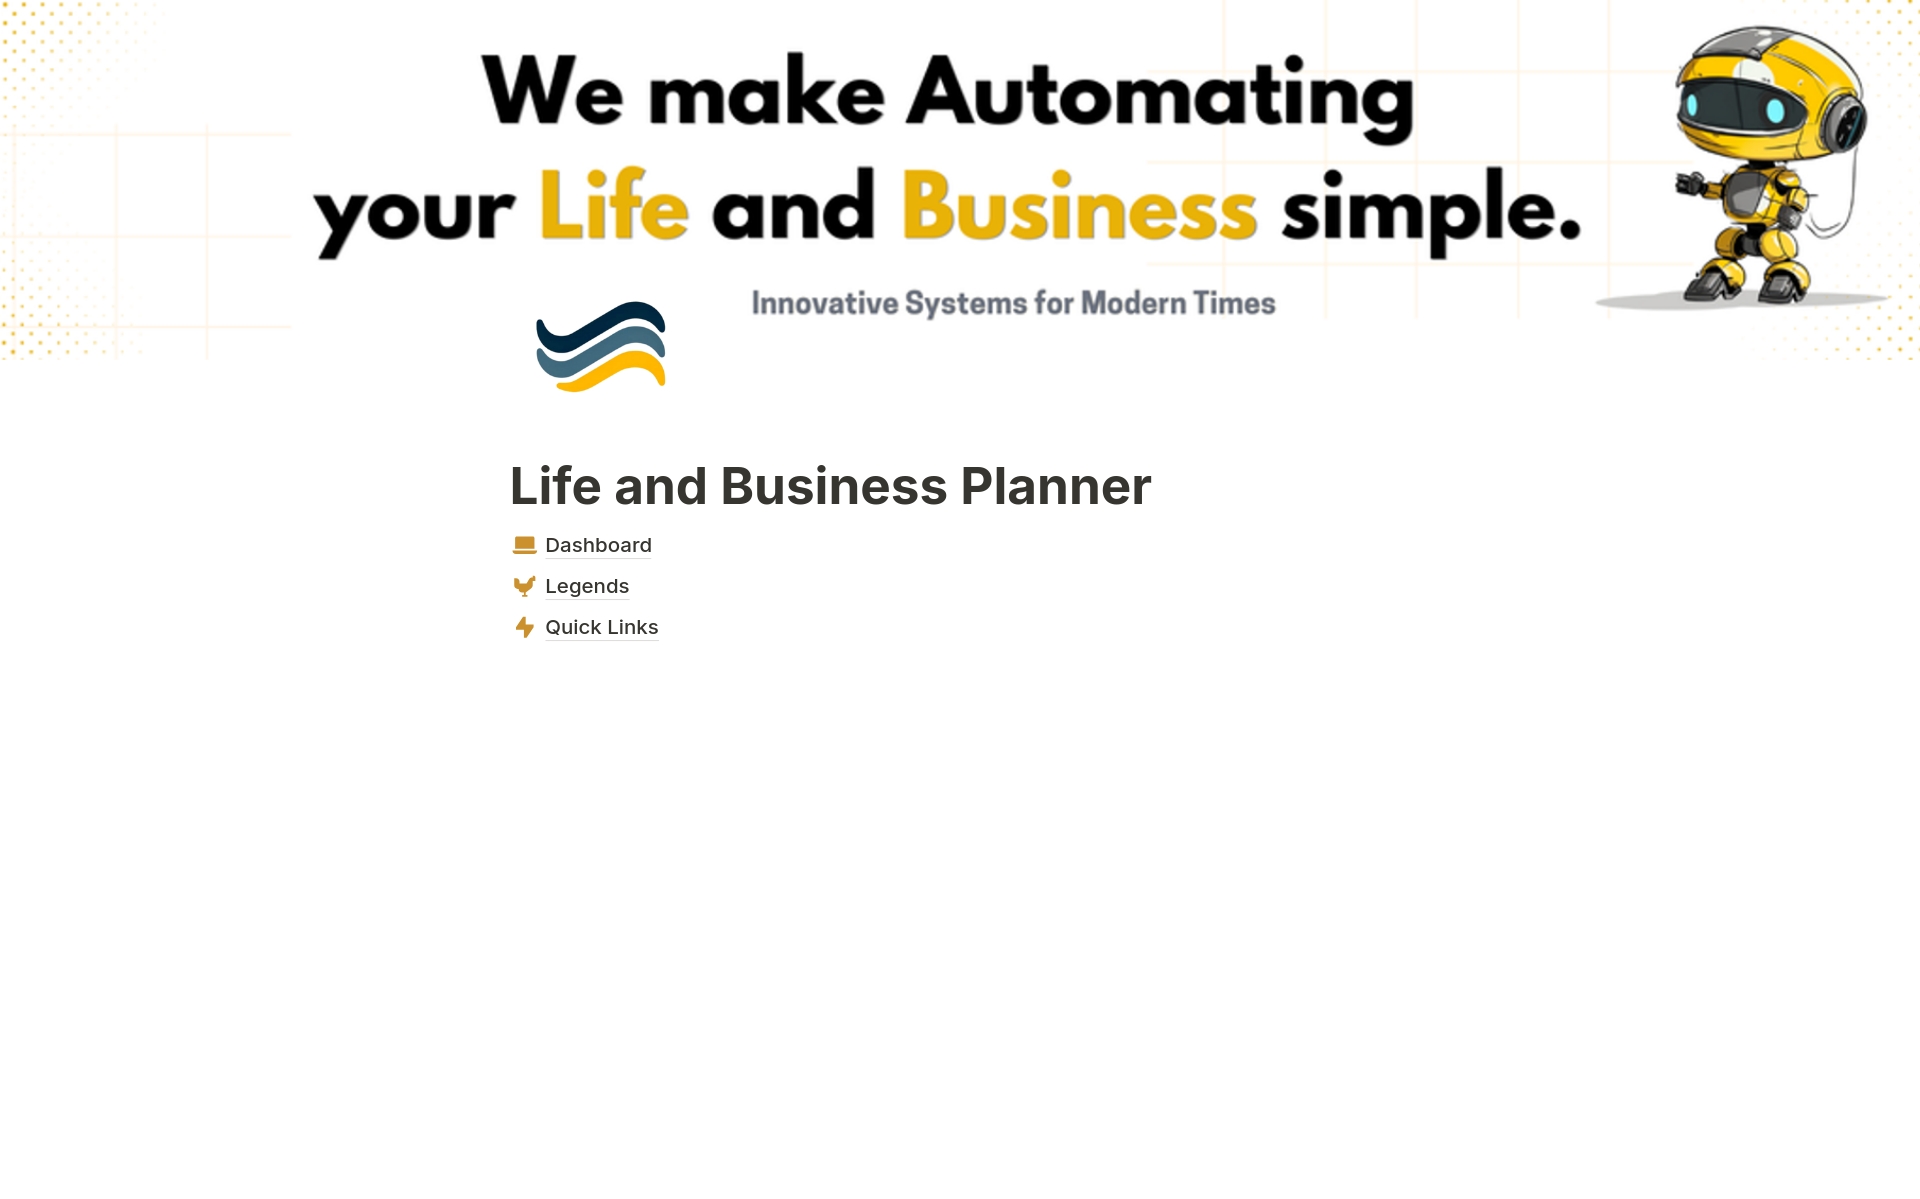 Built for Focus and boosting Productivity.
Multiple systems connected to keep an organised system to sort out tasks, projects, goals, content management, CRM, all in one template to help you get organised.
A system built with care and is being actively used by us internally. 
